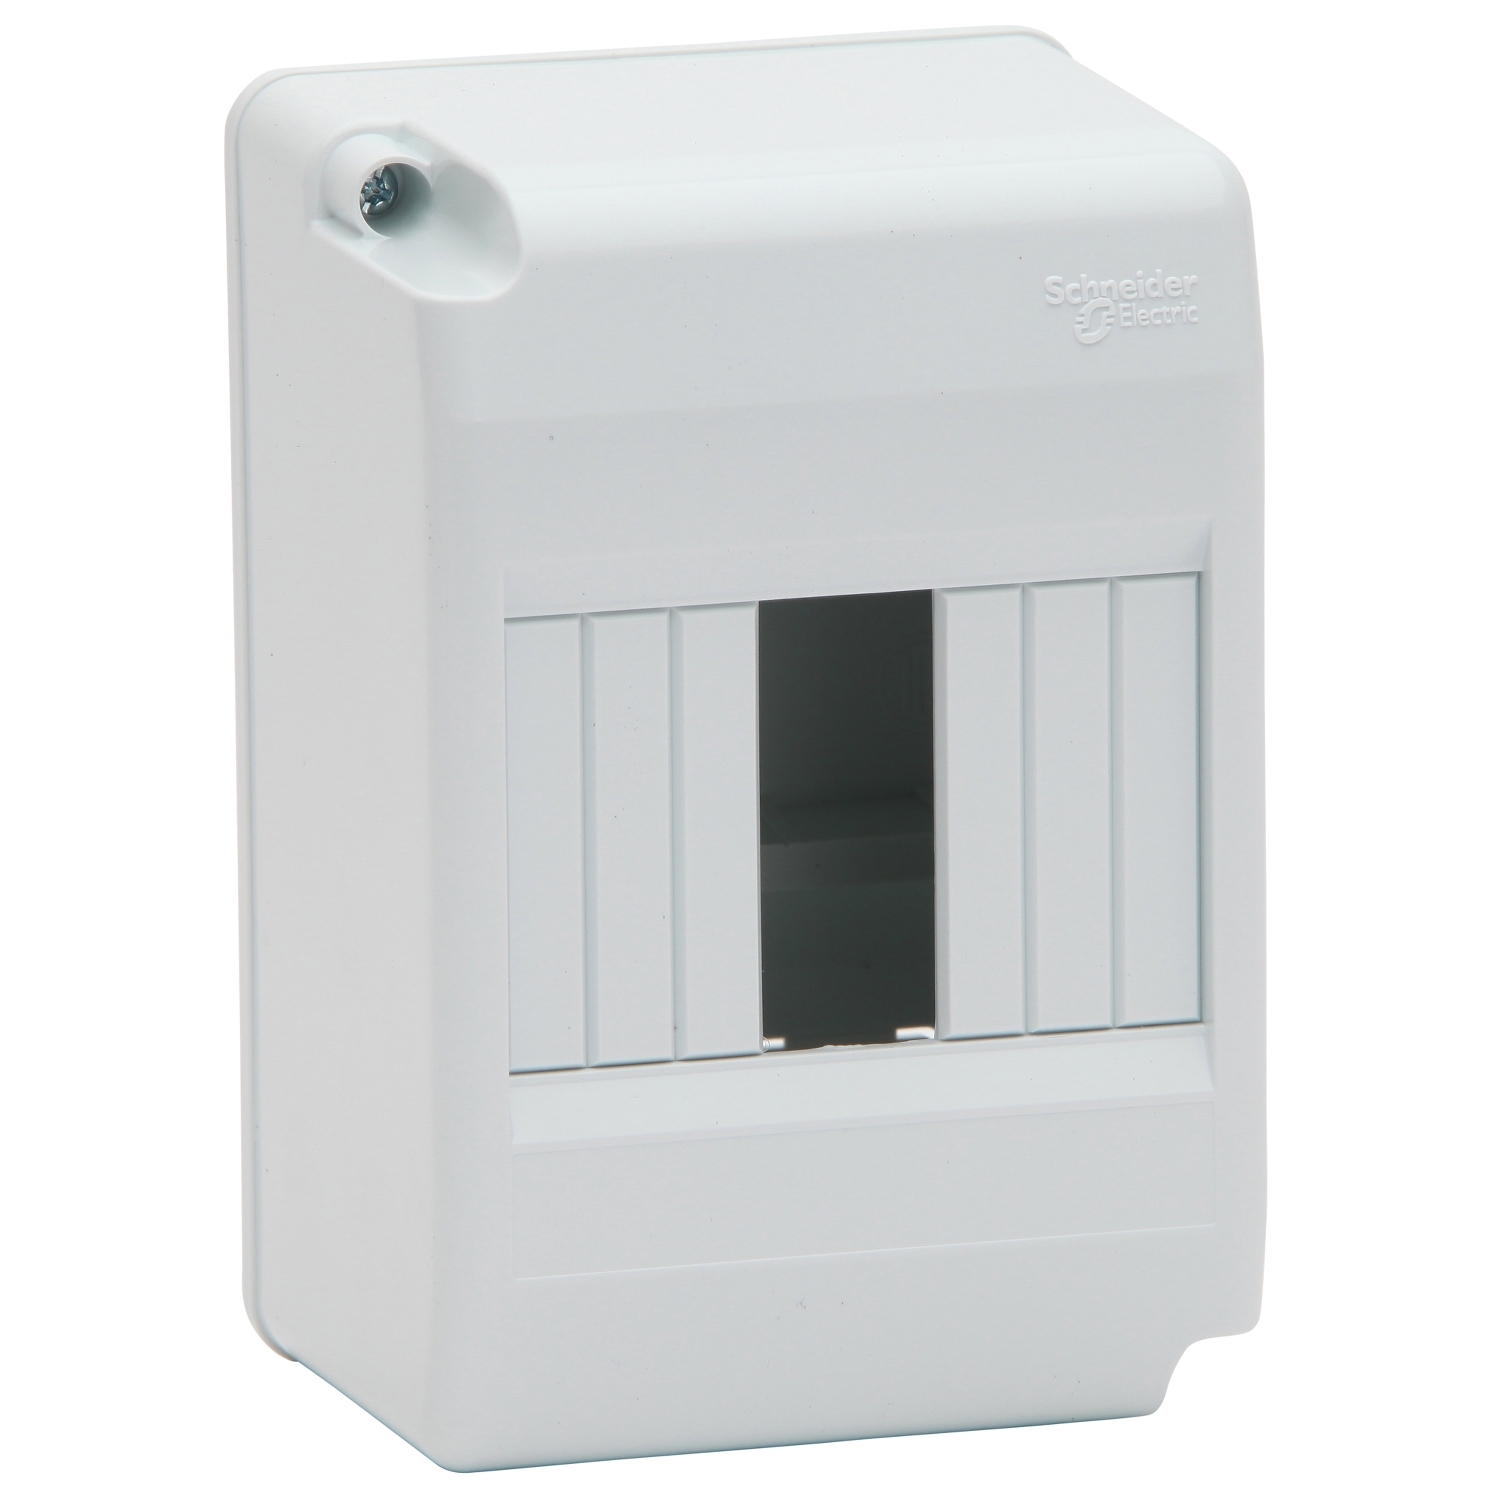 PDL 4-Way x 1 Surface Enclosure; 1-Pole and 1/2-Pole Knockouts Opening, ABS, White